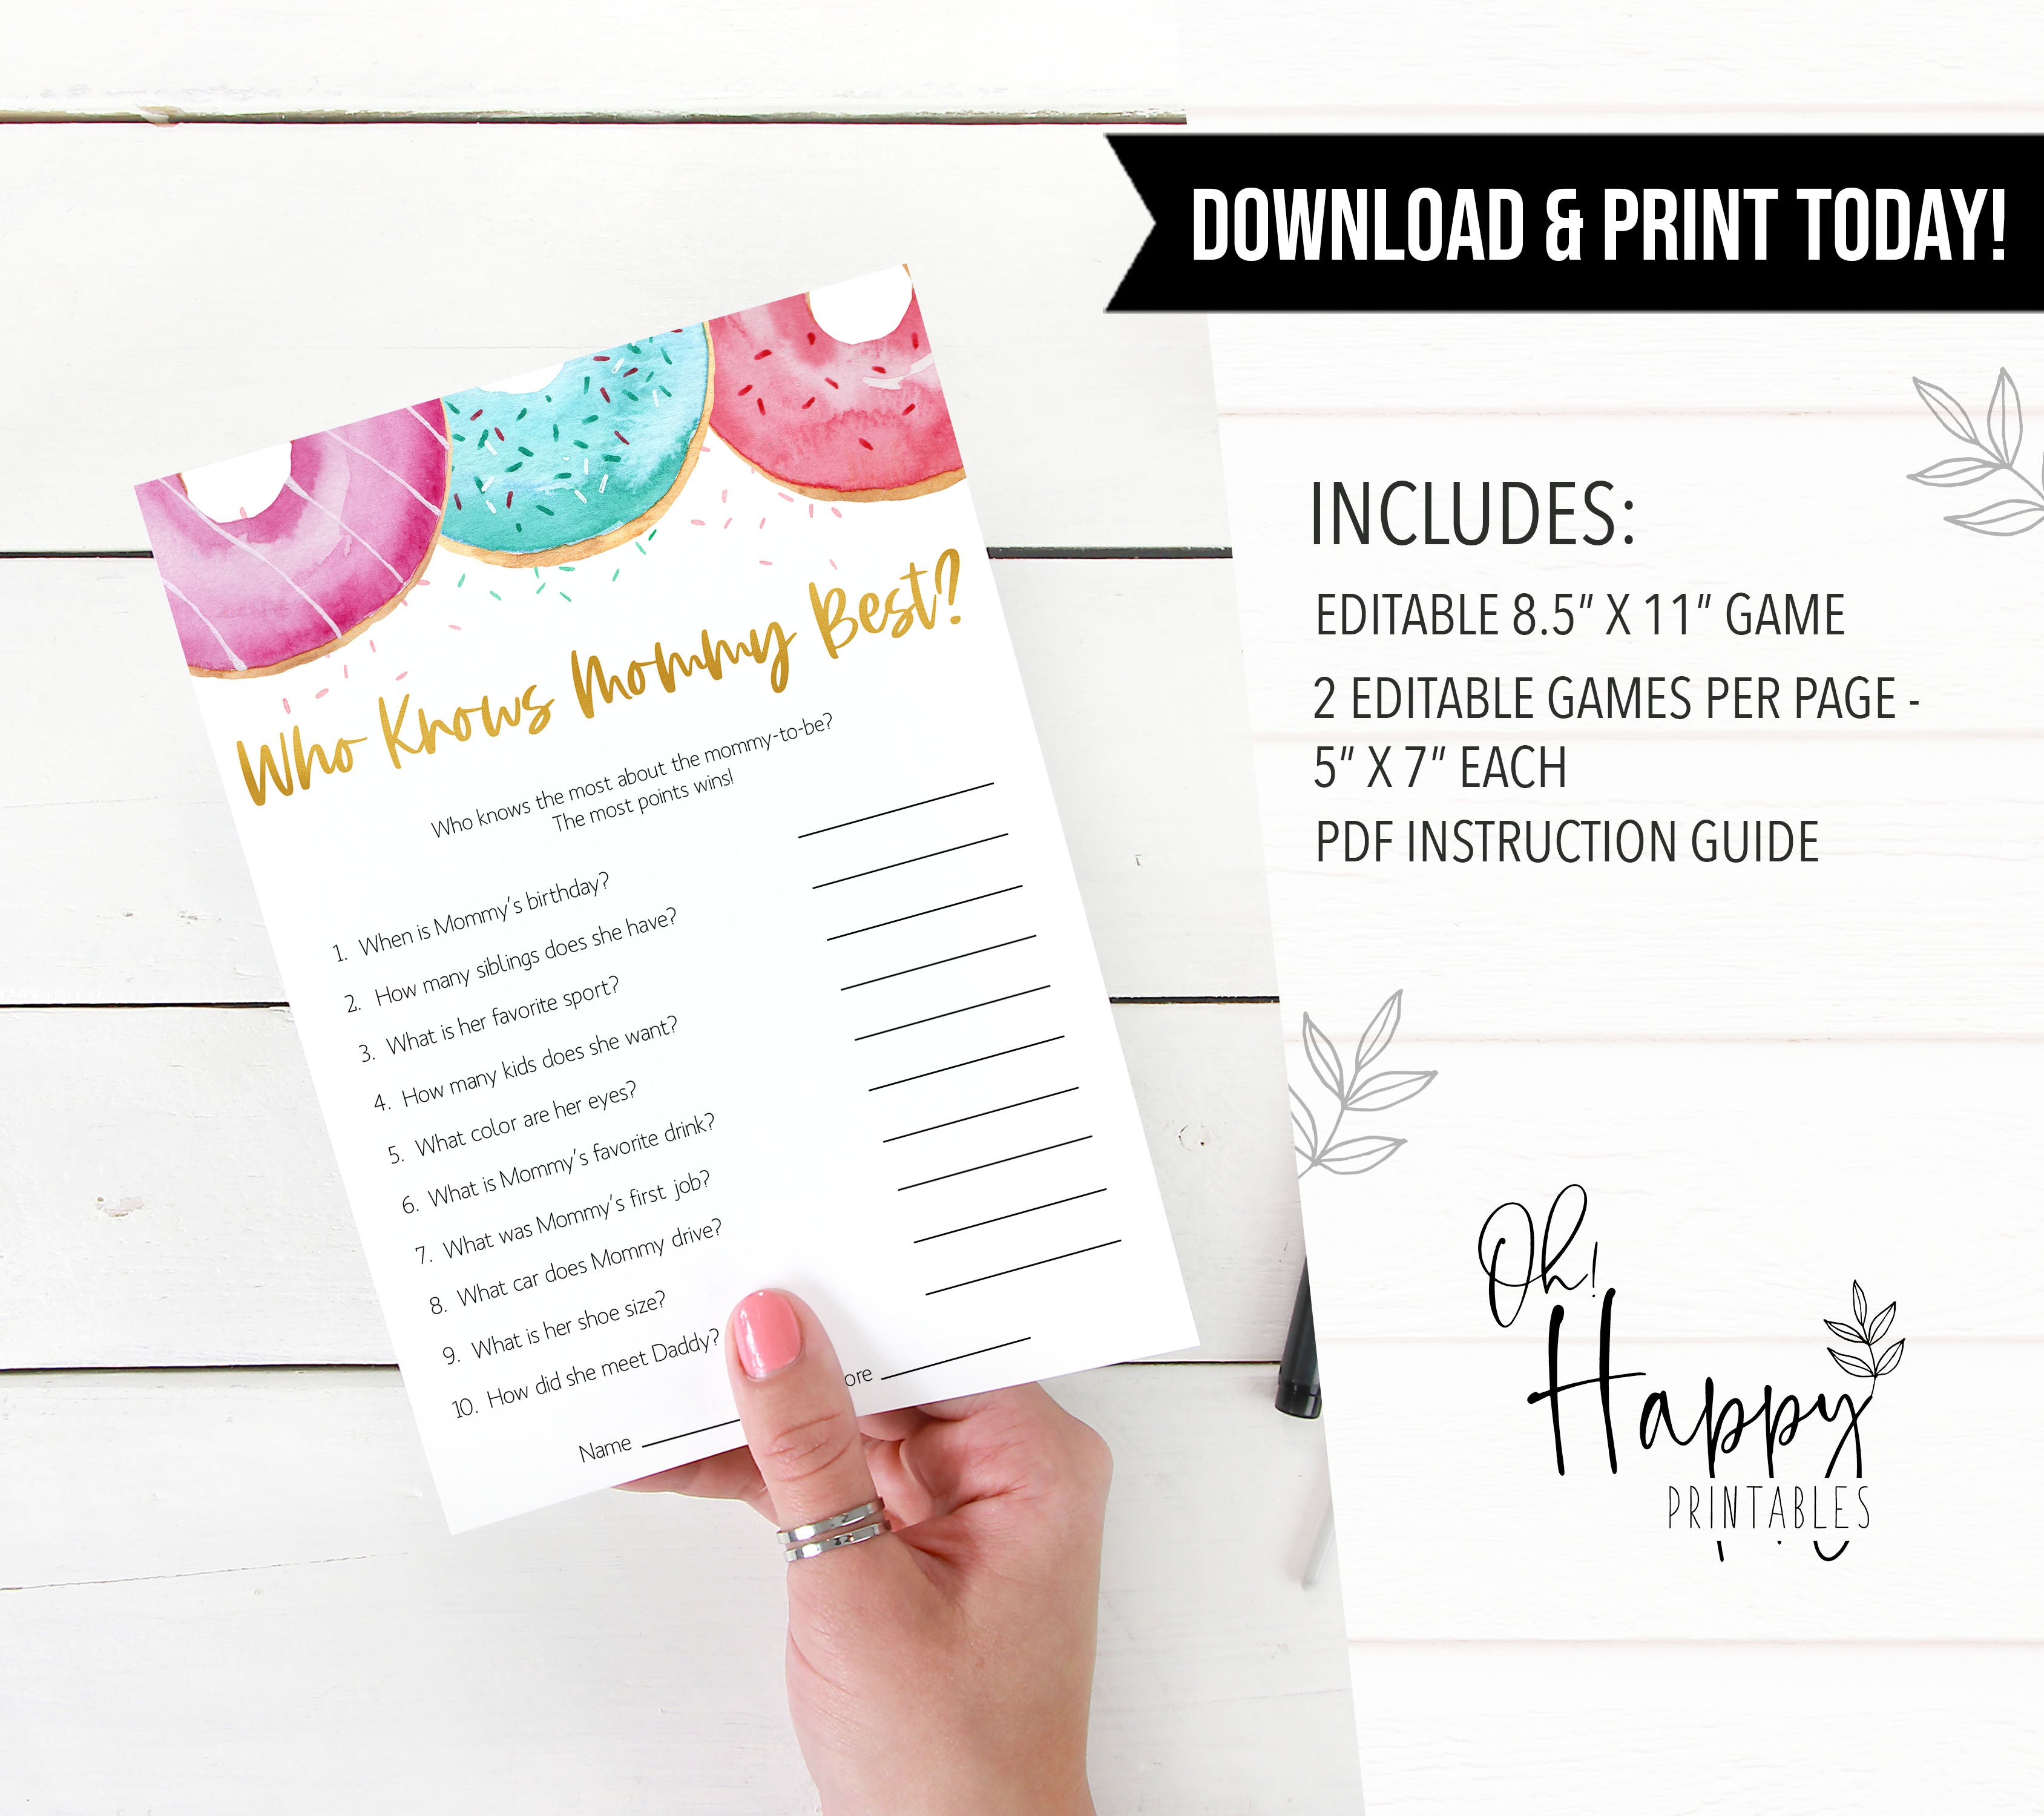 editable baby games, who knows mommy best game, Printable baby shower games, donut baby games, baby shower games, fun baby shower ideas, top baby shower ideas, donut sprinkles baby shower, baby shower games, fun donut baby shower ideas